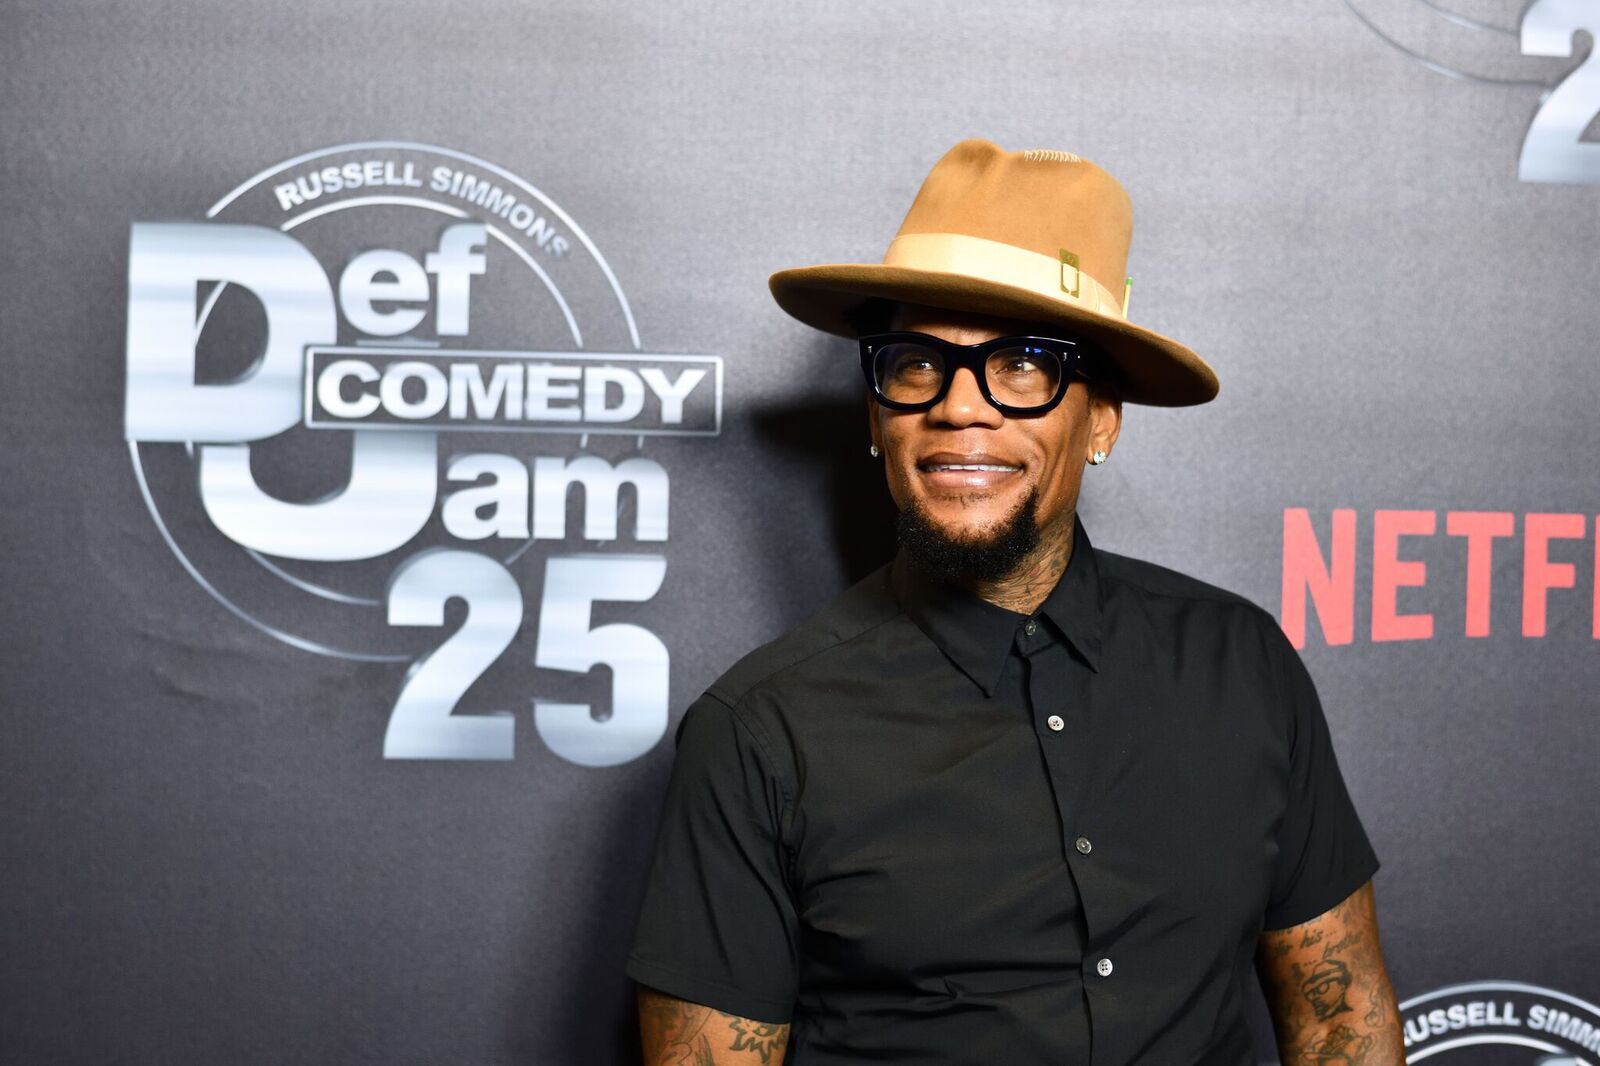  D.L. Hughley at "Def Comedy Jam 25" in Beverly Hills in 2017. | Photo: Getty Images